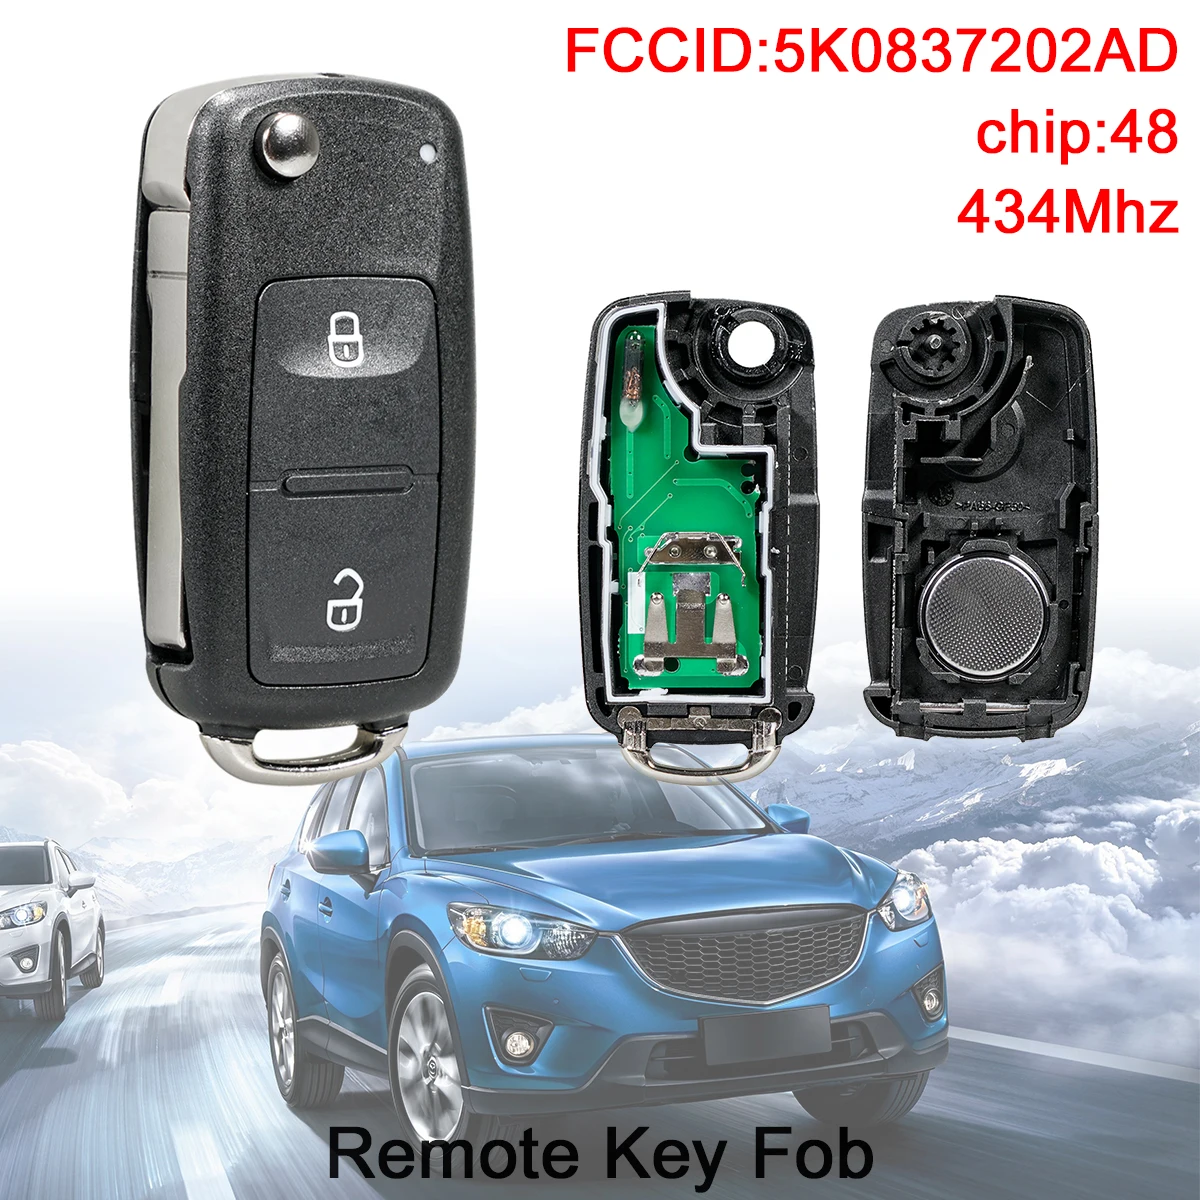 2 Buttons 433MHz  Keyless Smart Remote Car Key Fob with ID48 Chip5K0837202AD Fit for Volkswagen VW  Transporter 2011-2016 433mhz 3 button car remote key with id48 chip 8x0837220d 8x0837220 for audi a1 q3 s1 2010 2011 2012 2013 2014 2015 2016 2017